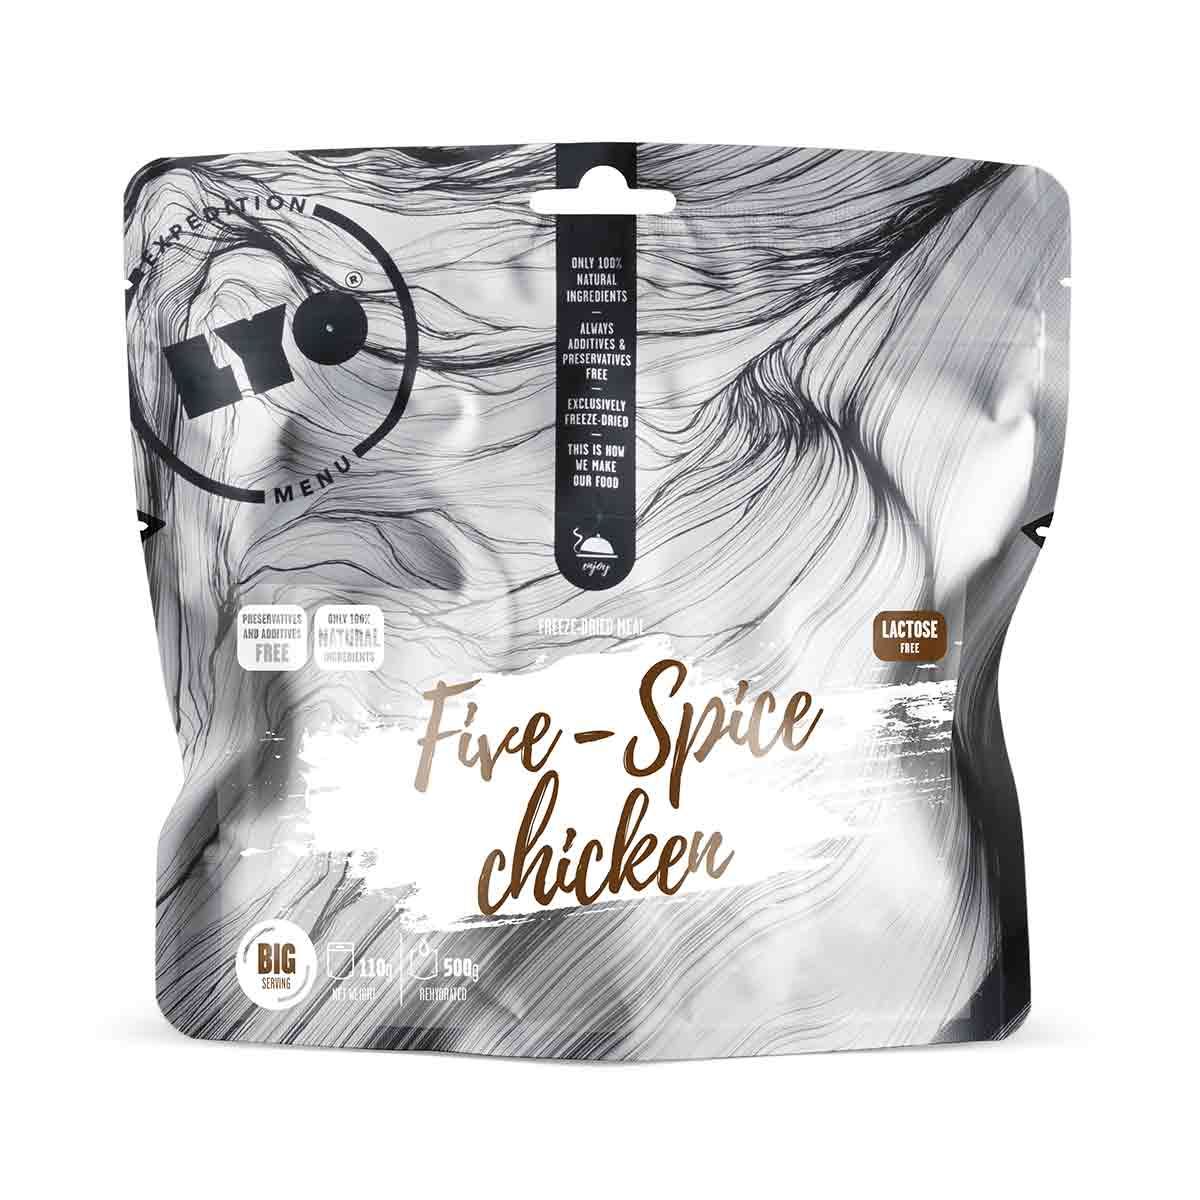 Five spice chicken and rice - Big pack